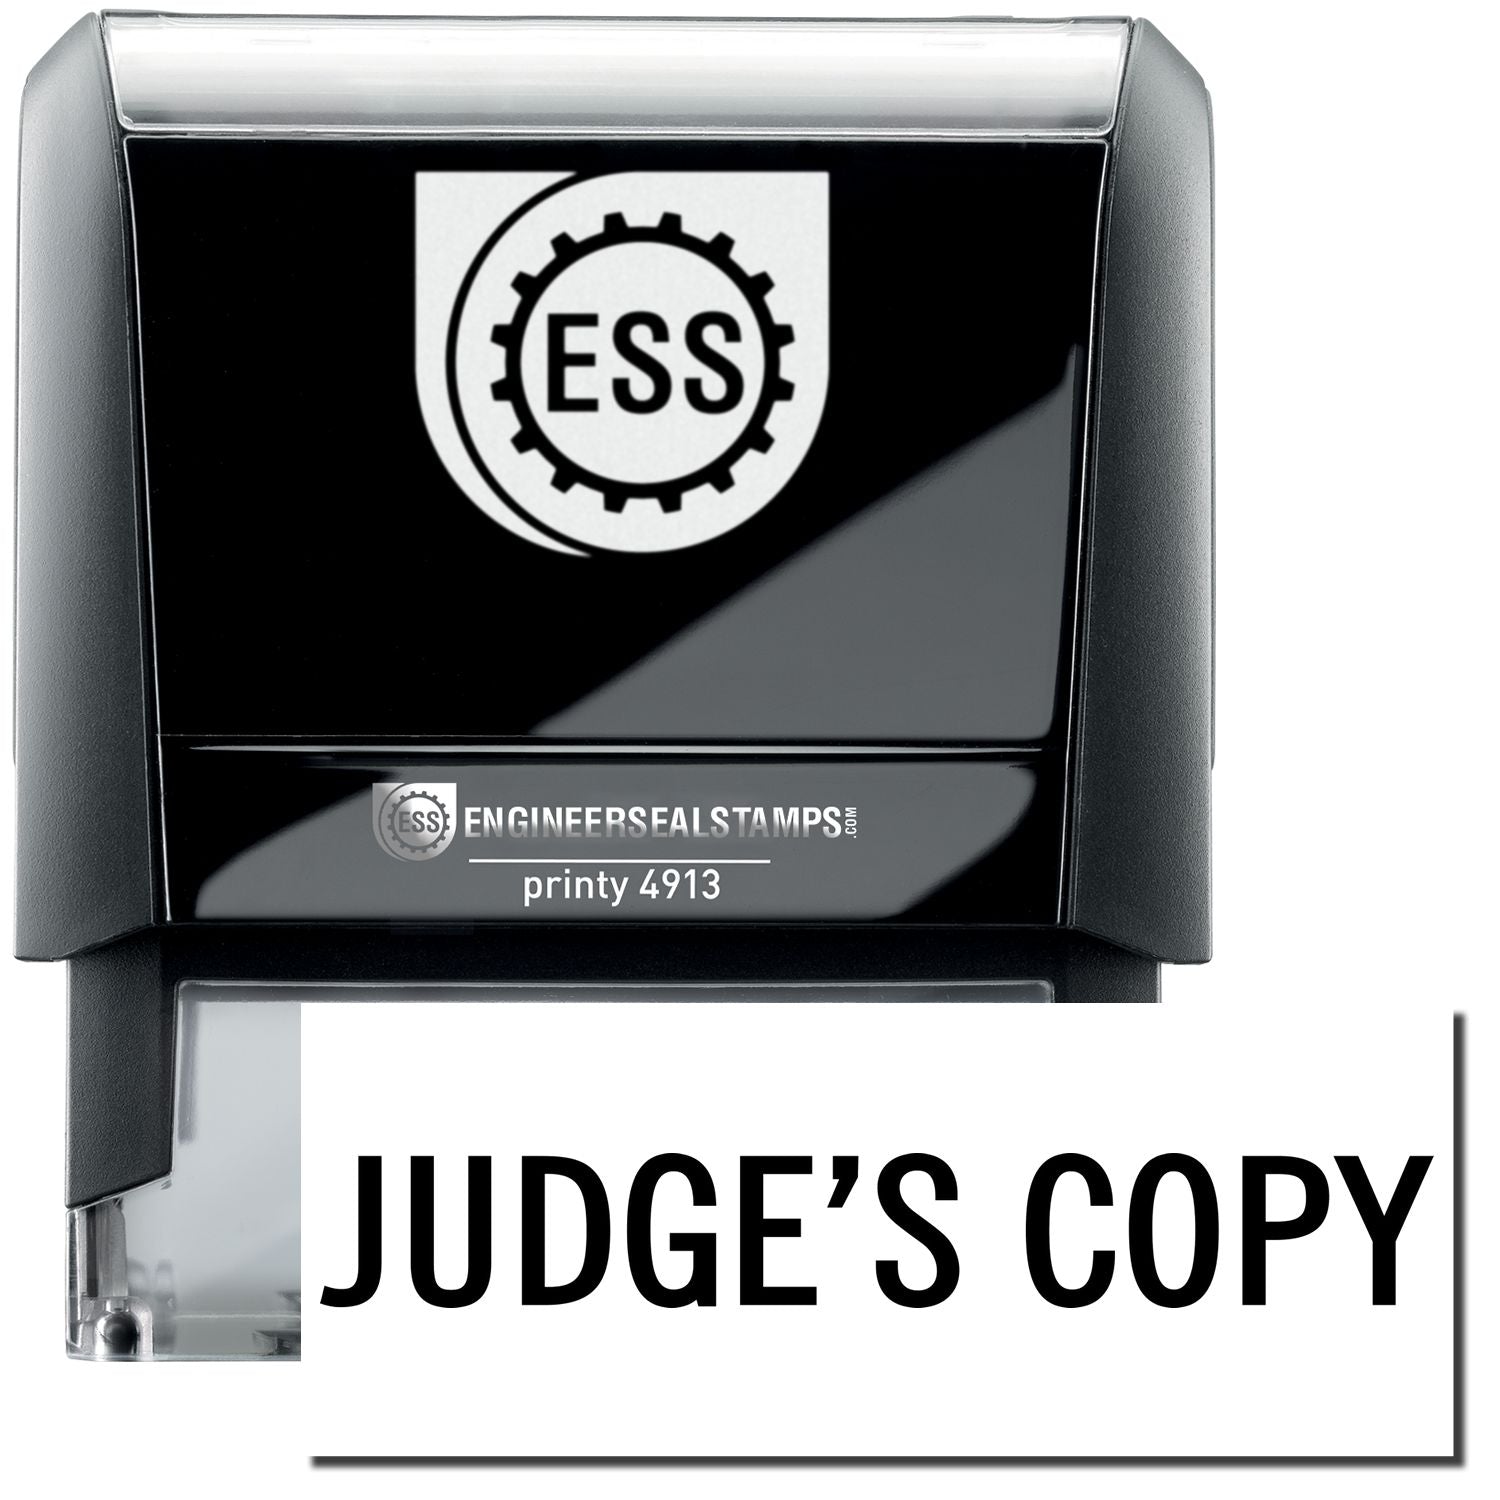 A self-inking stamp with a stamped image showing how the text "JUDGE'S COPY" in a large font is displayed by it after stamping.